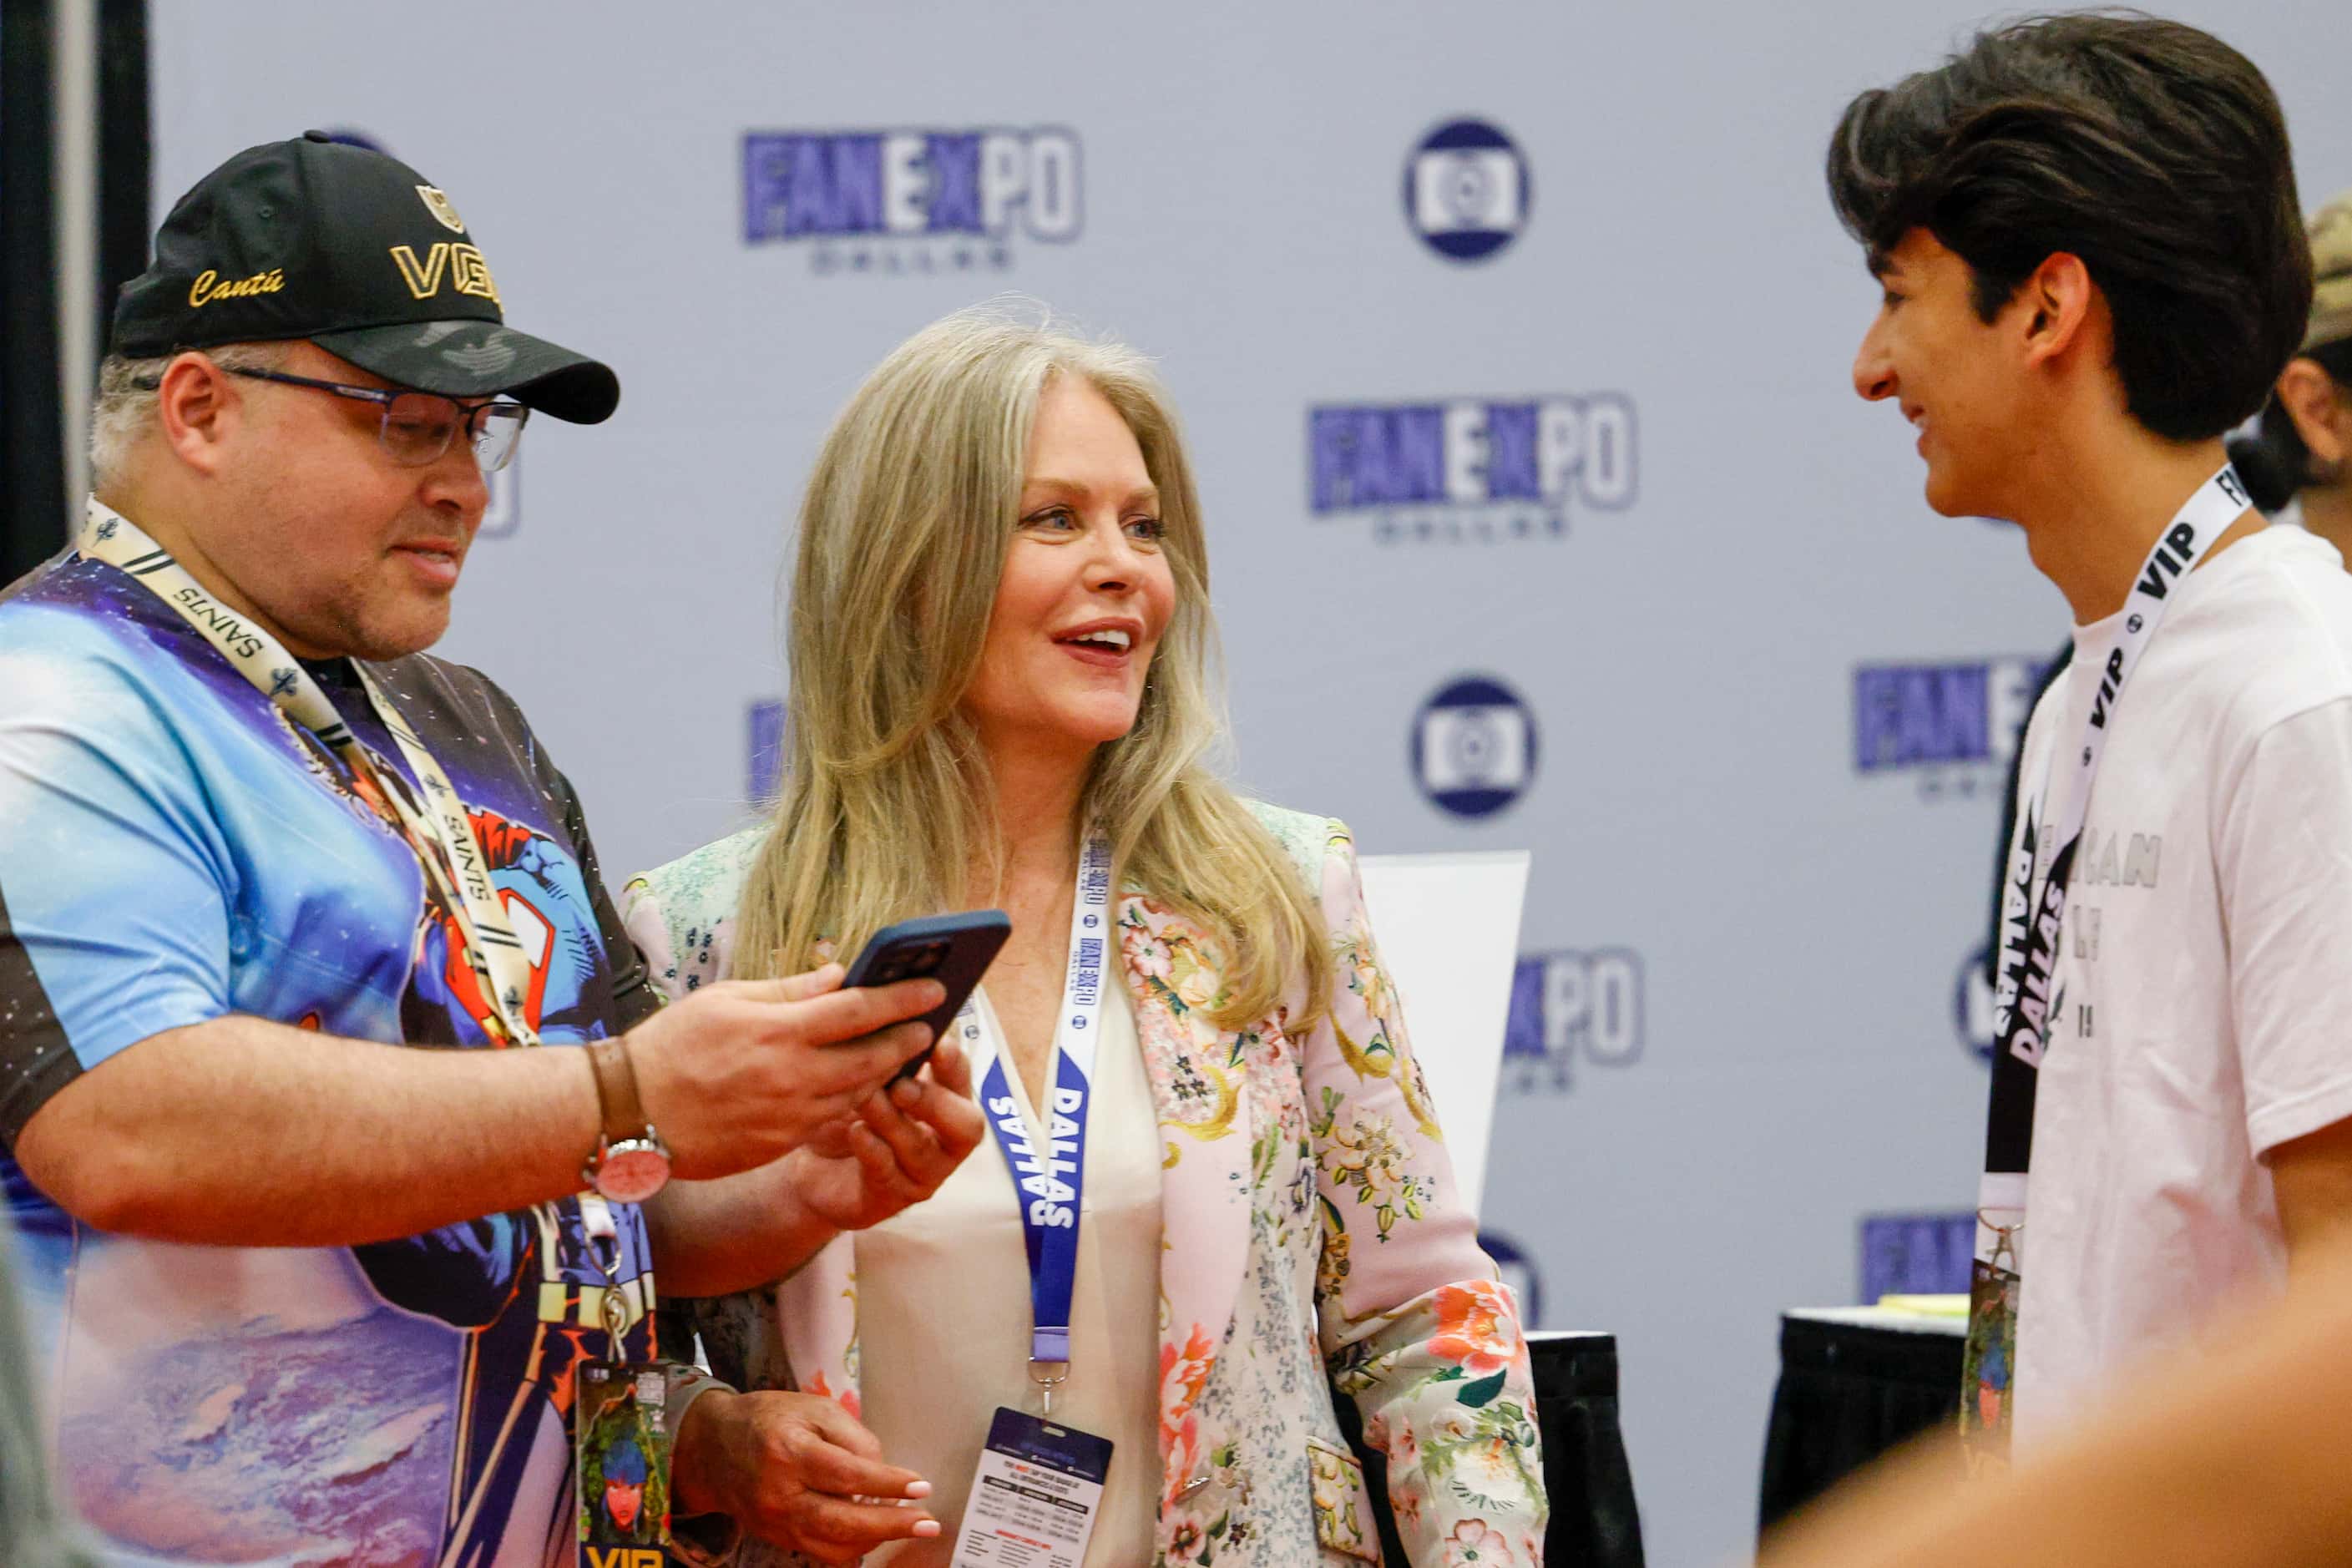 Rene Cantu (left) and Joel Gonzalez (right) talk with actress Beverly D'Angelo at Fan Expo...